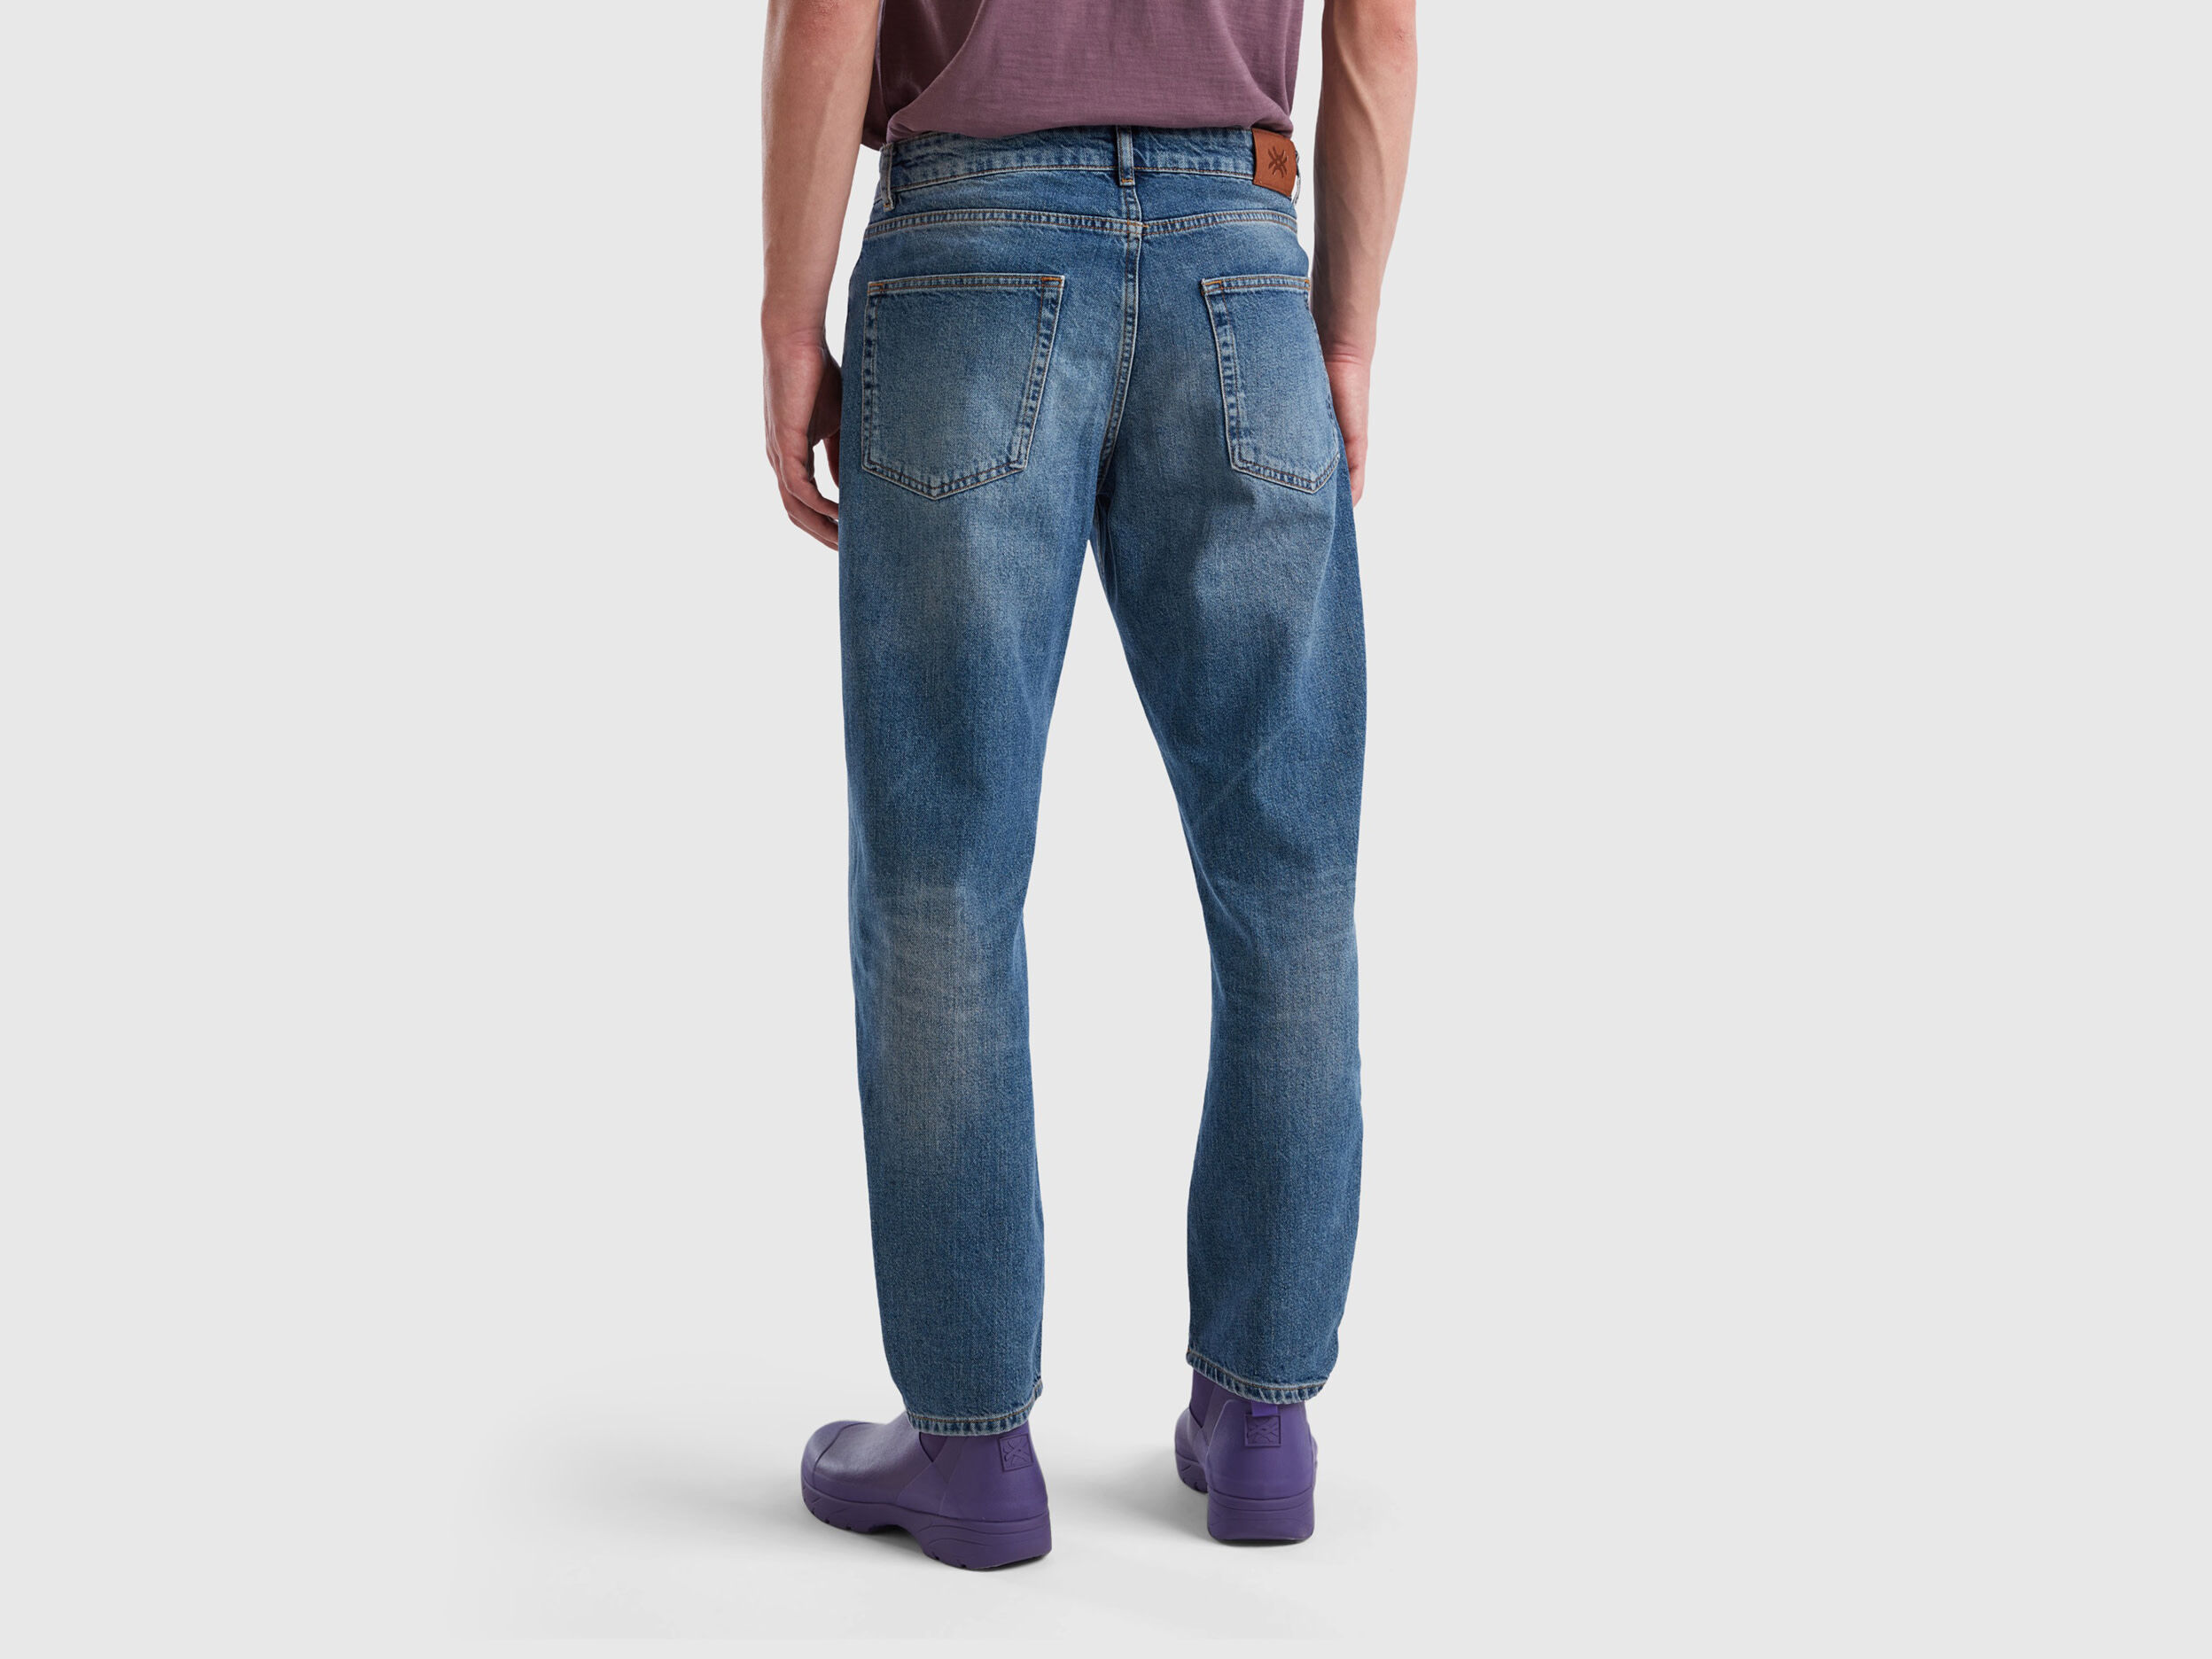 Men's Tapered Fit Jeans | M&S